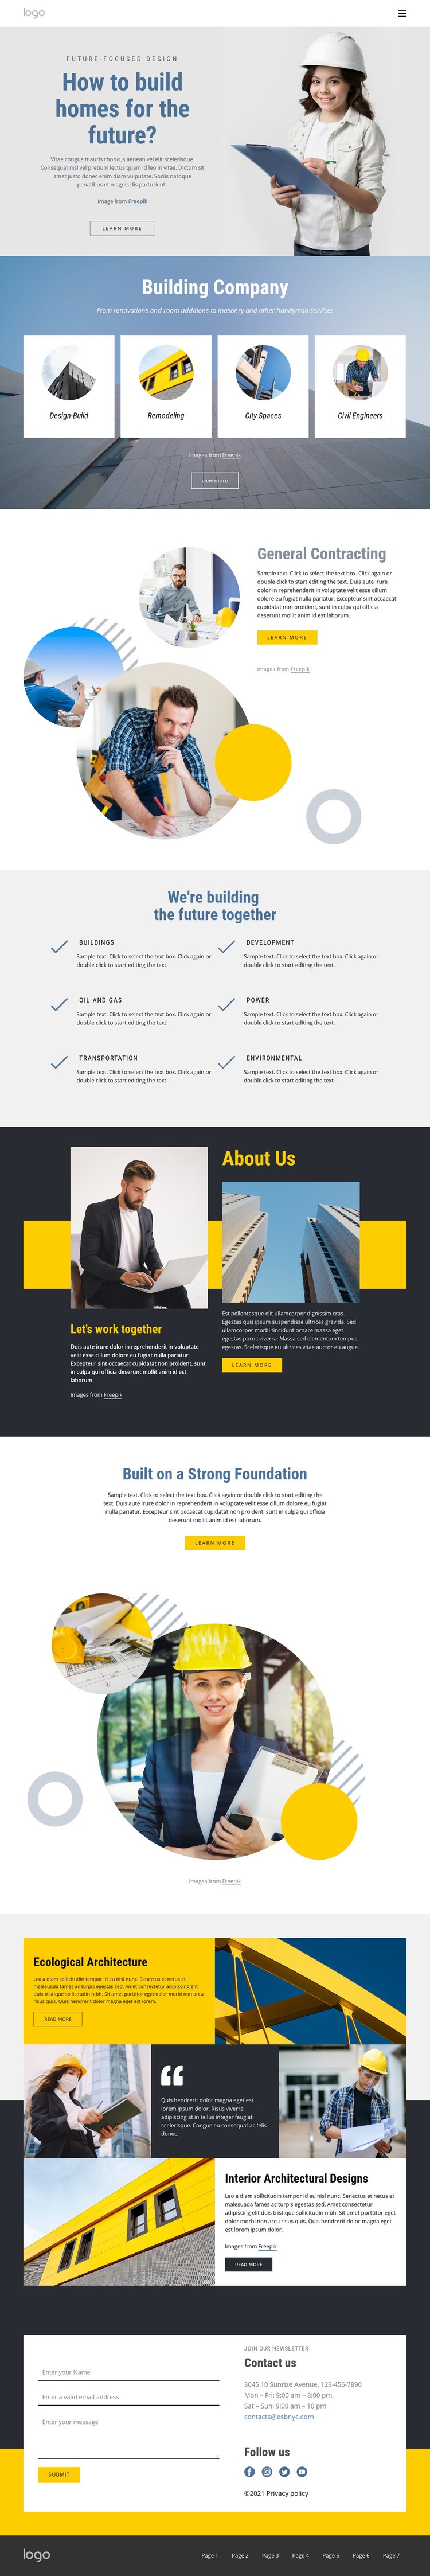 General contracting company Web Page Design